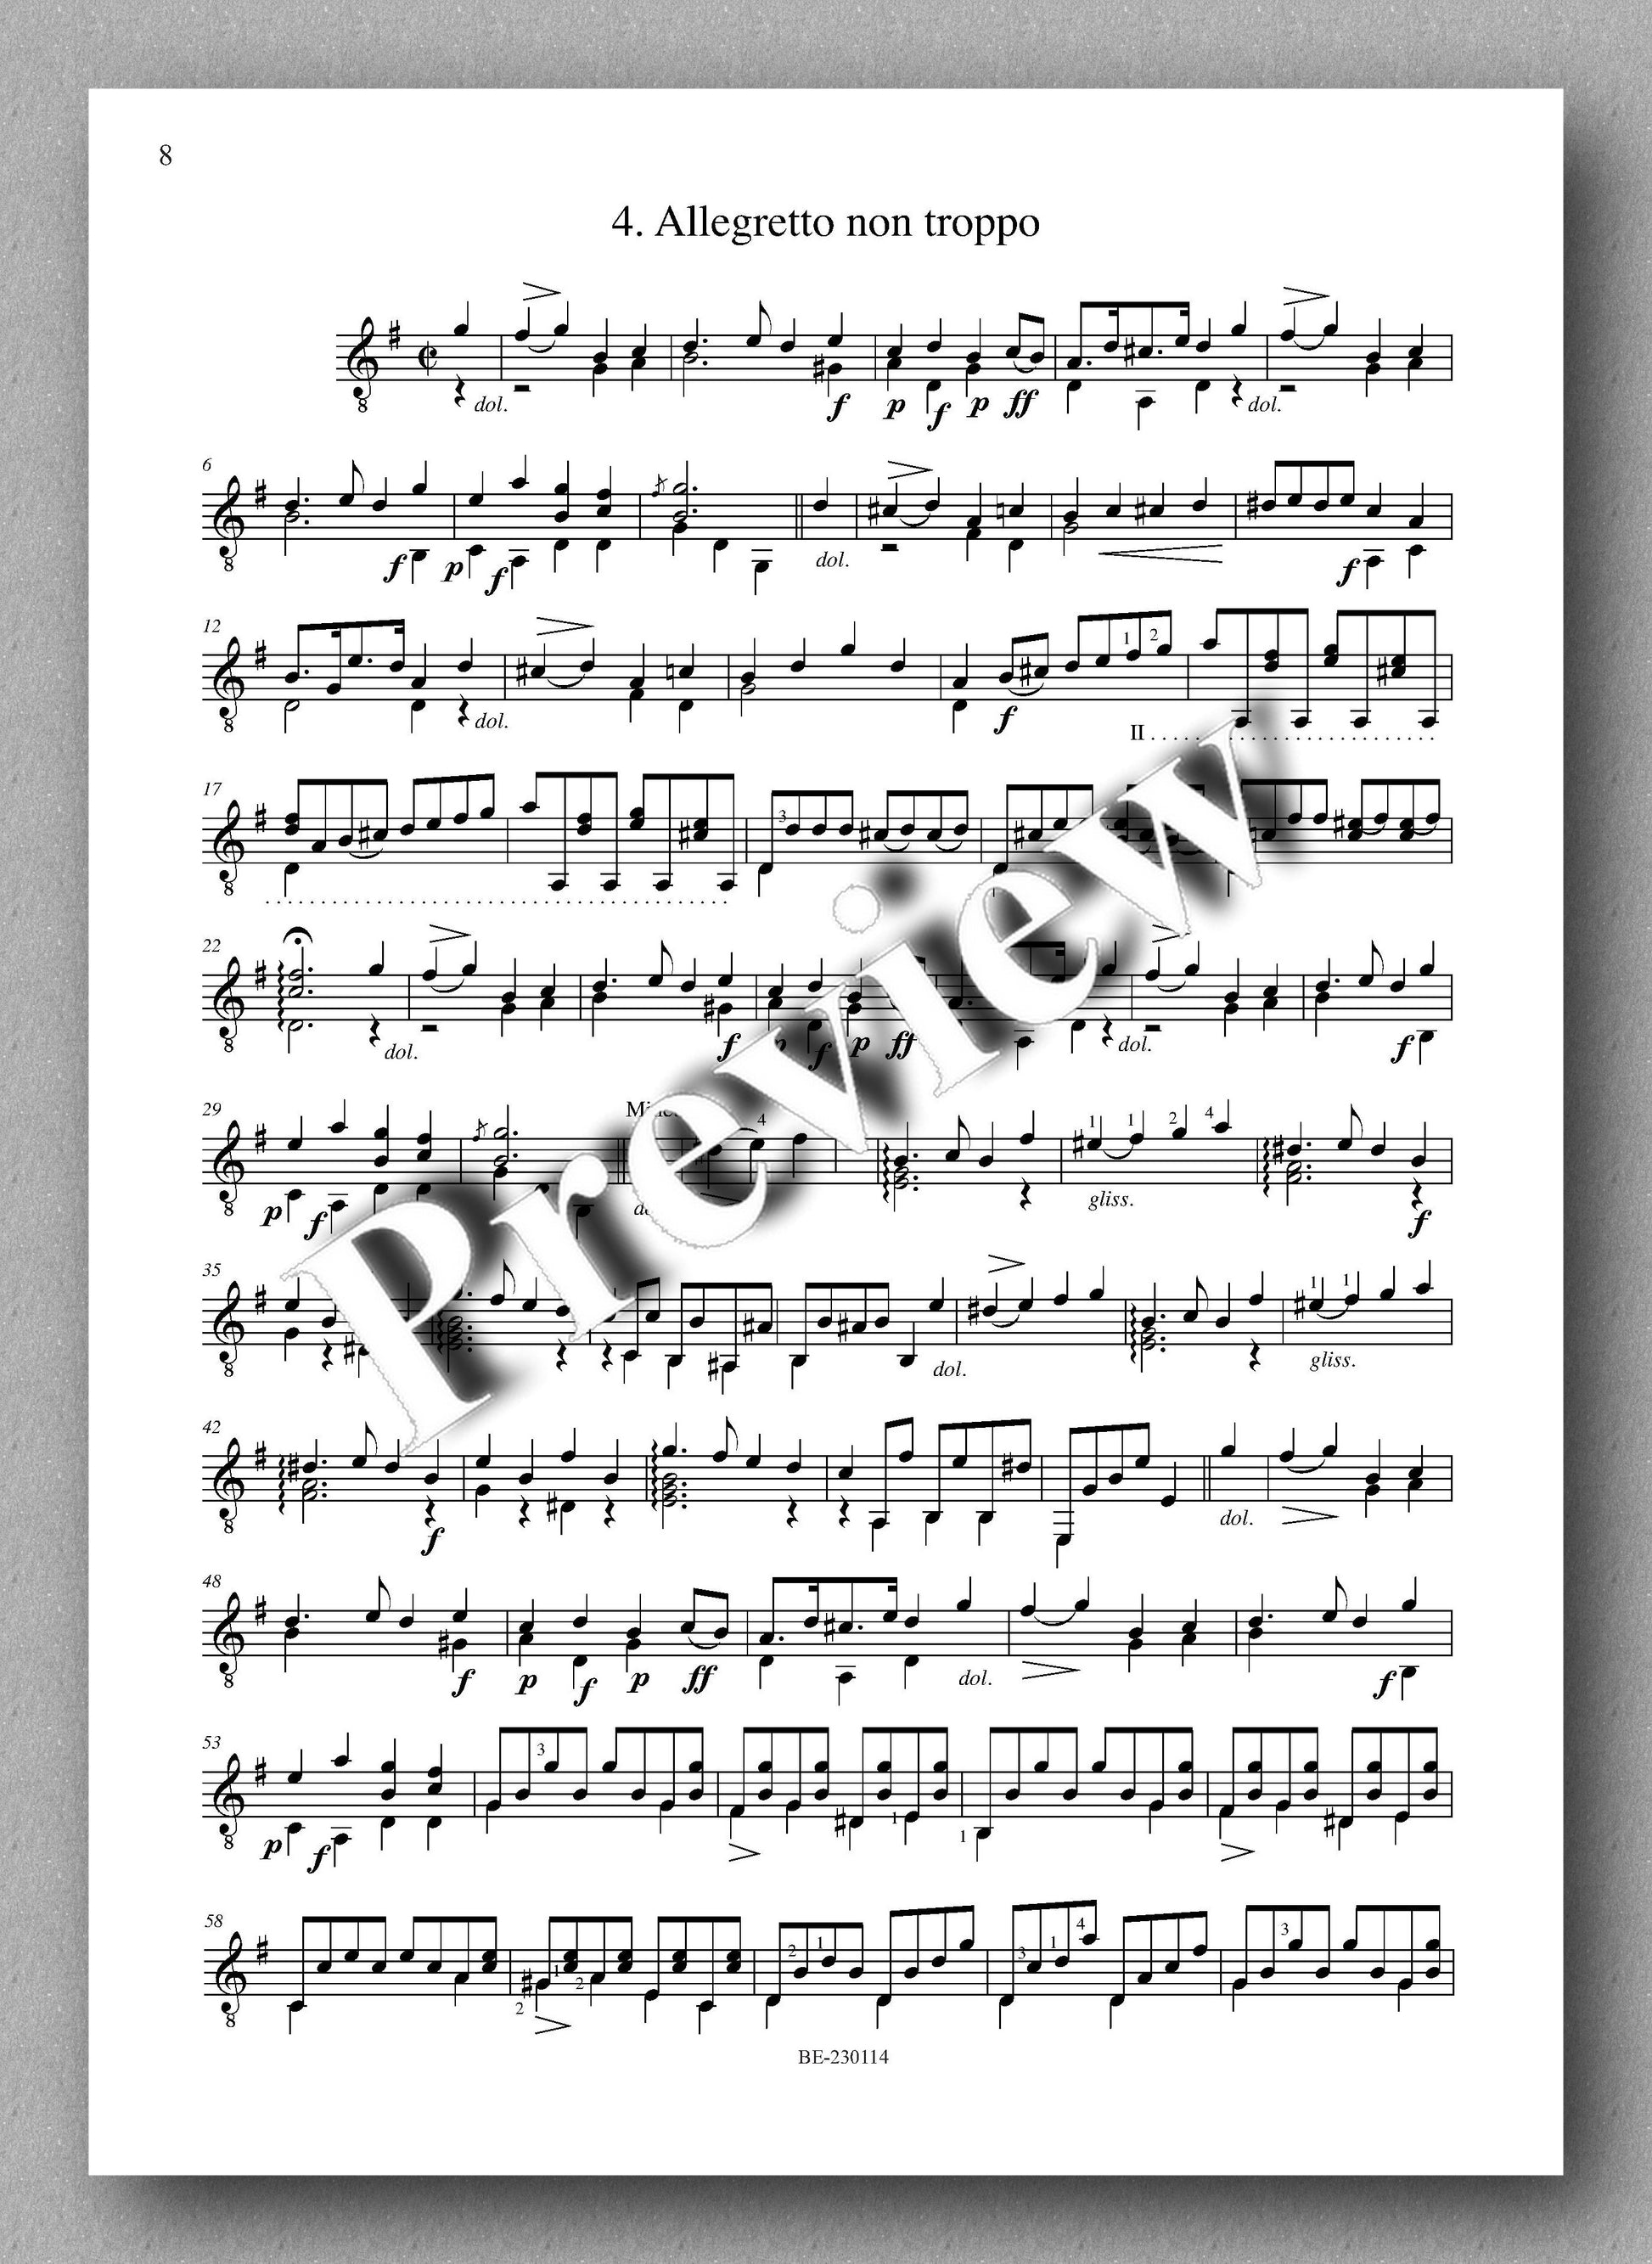 Copy of Molino, Collected Works for Guitar Solo, Vol. 26 - preview of the music score 2